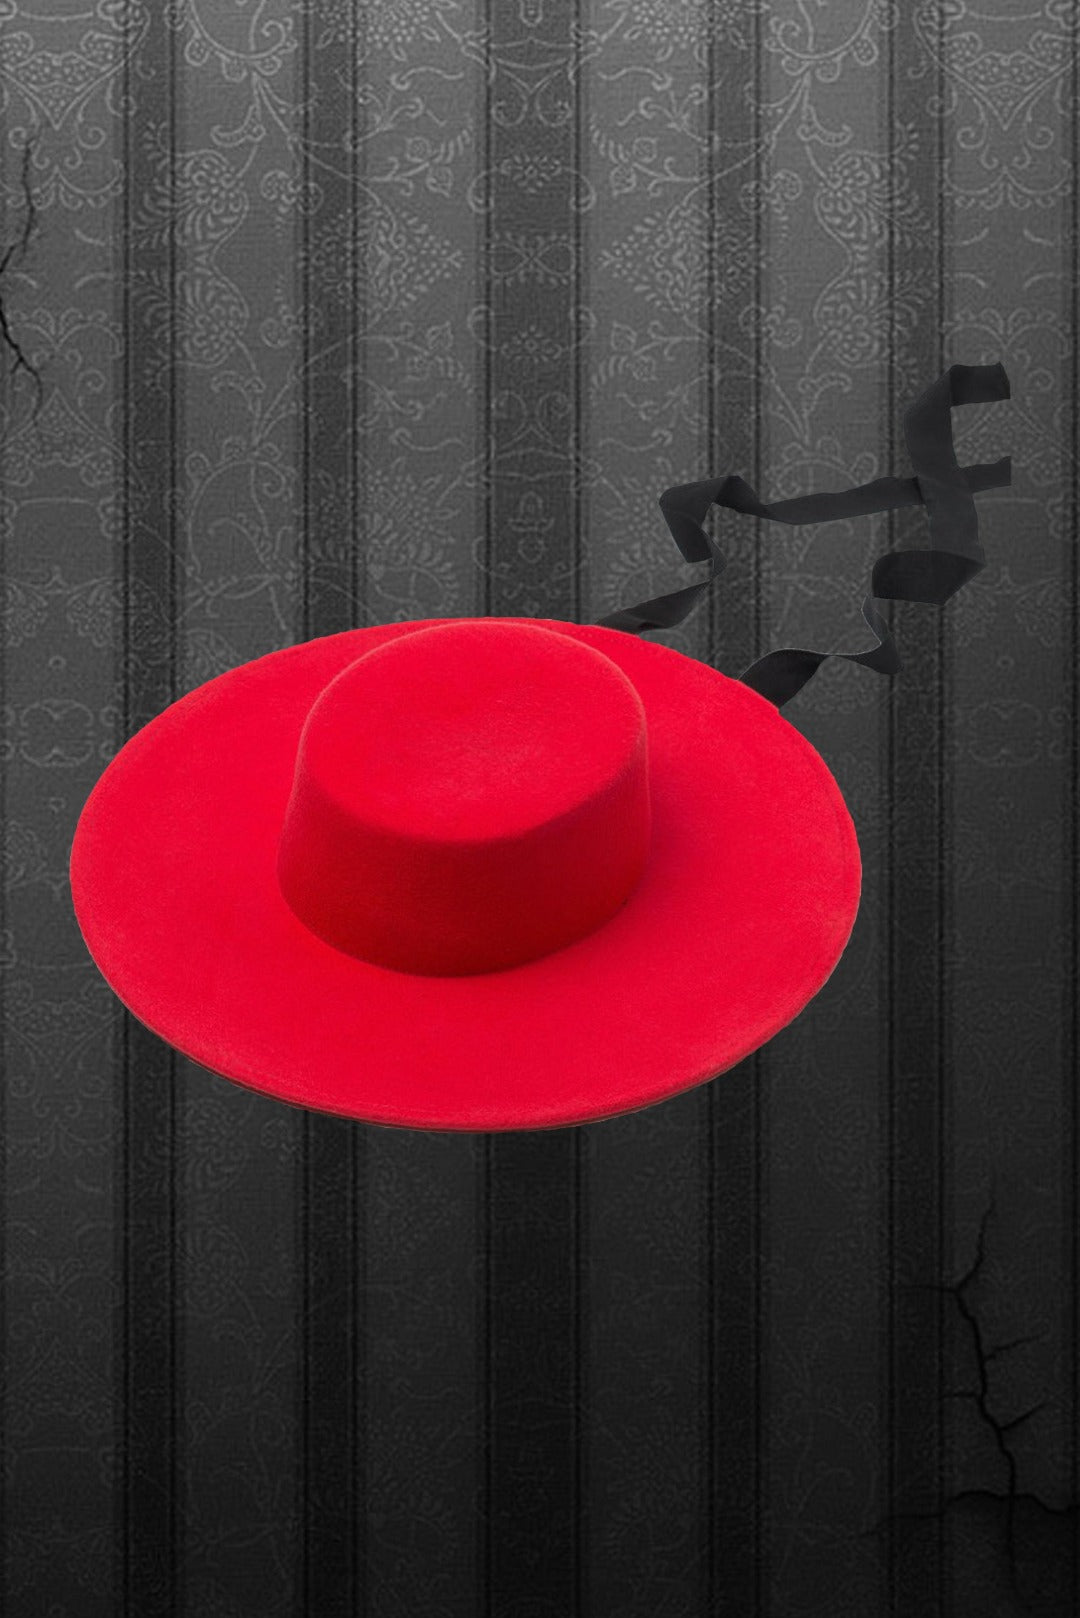 A red, wide brimmed wool hat with a black ribbon against a pin stripe background.